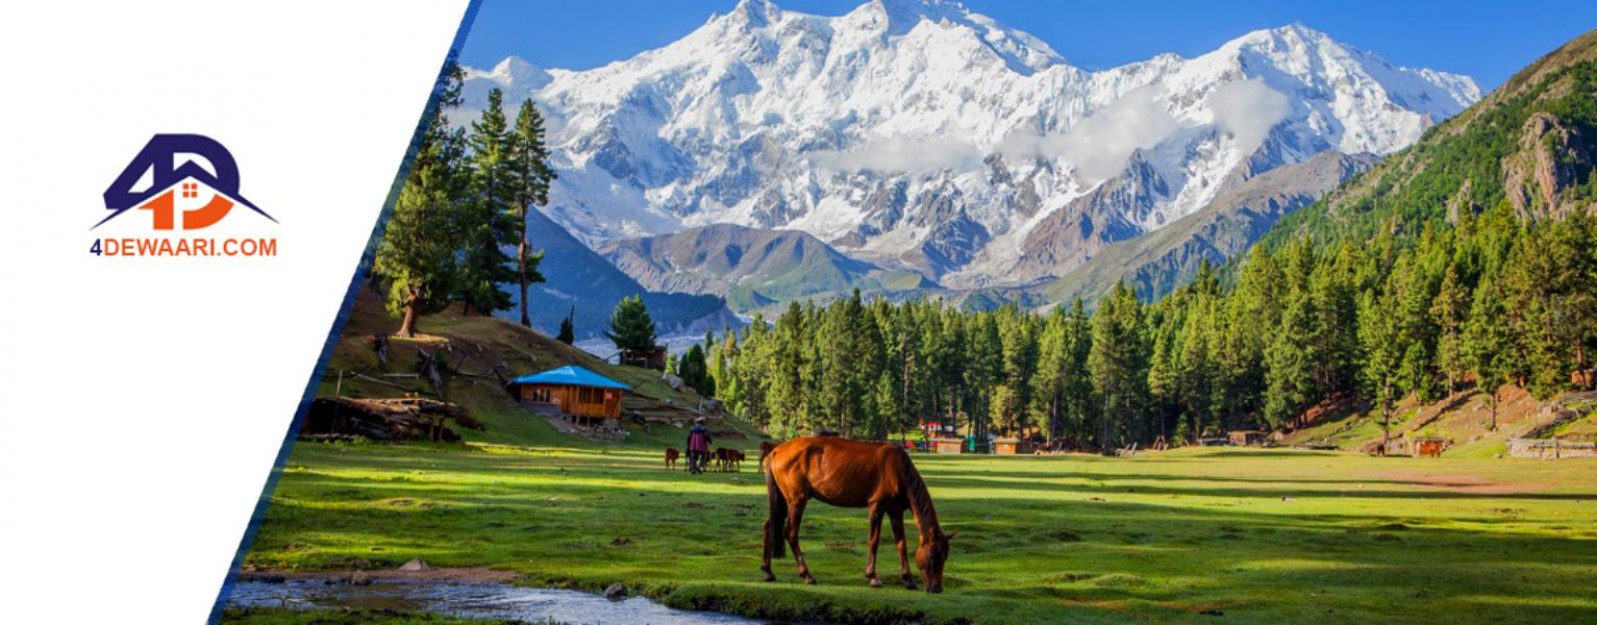 Travel’s Guide to Fairy Meadows Pakistan 2021